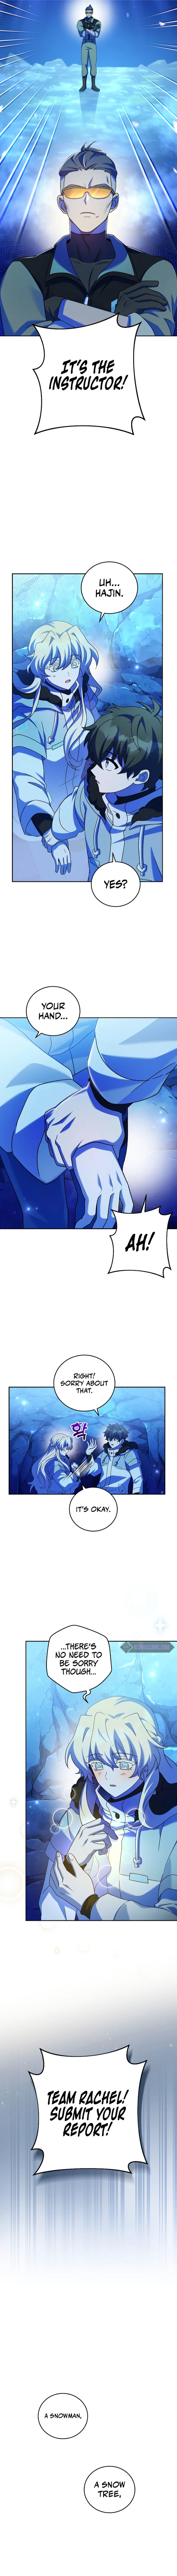 The Novel’s Extra (Remake) - Chapter 87 Page 11